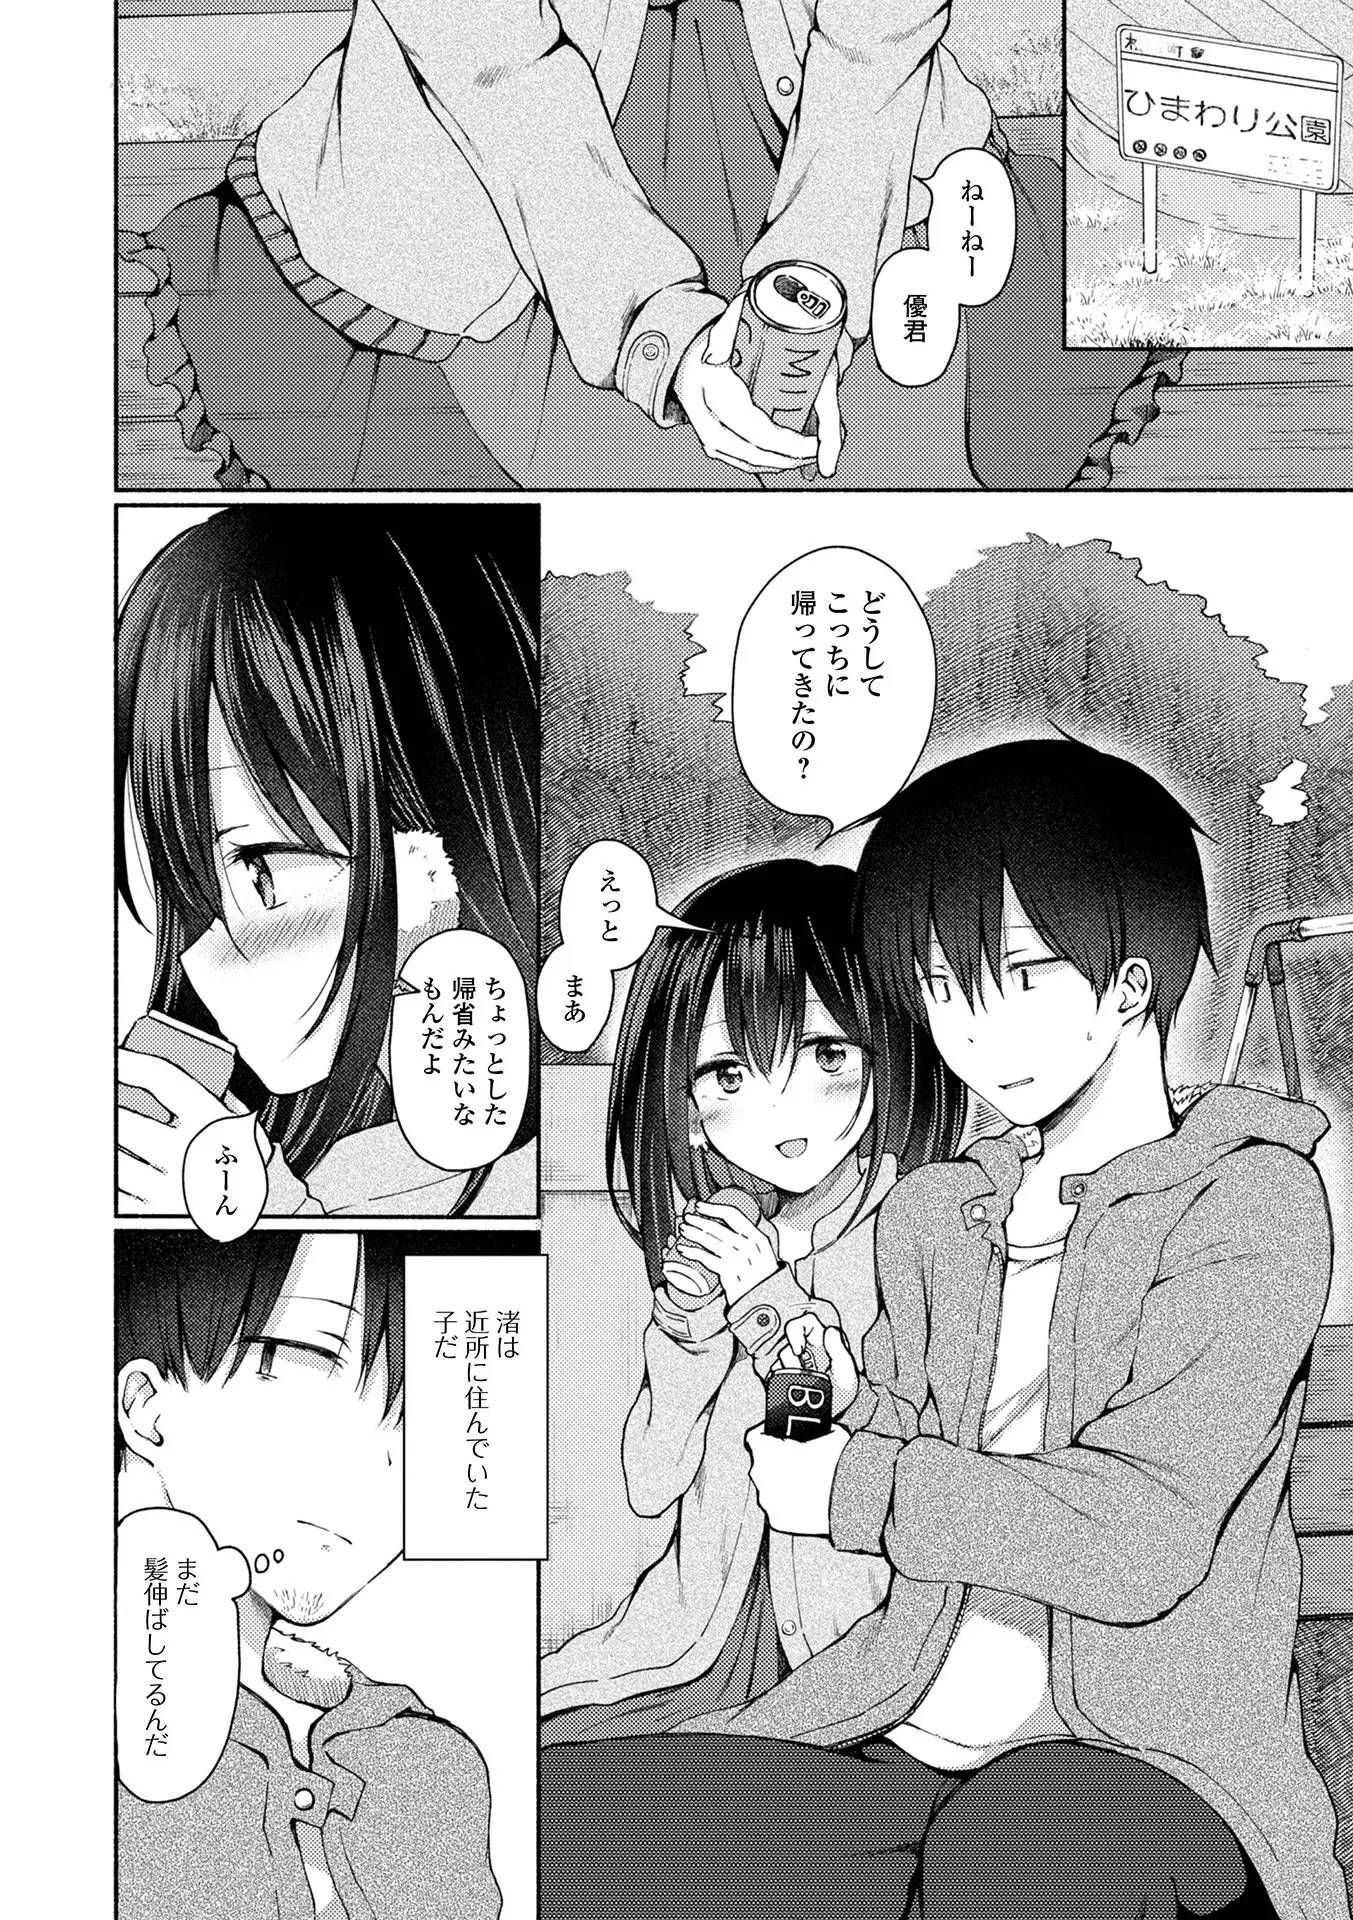 【Image】 Mr. Mann who saw the face of his childhood friend for the first time in a long time, becomes a female face www 1